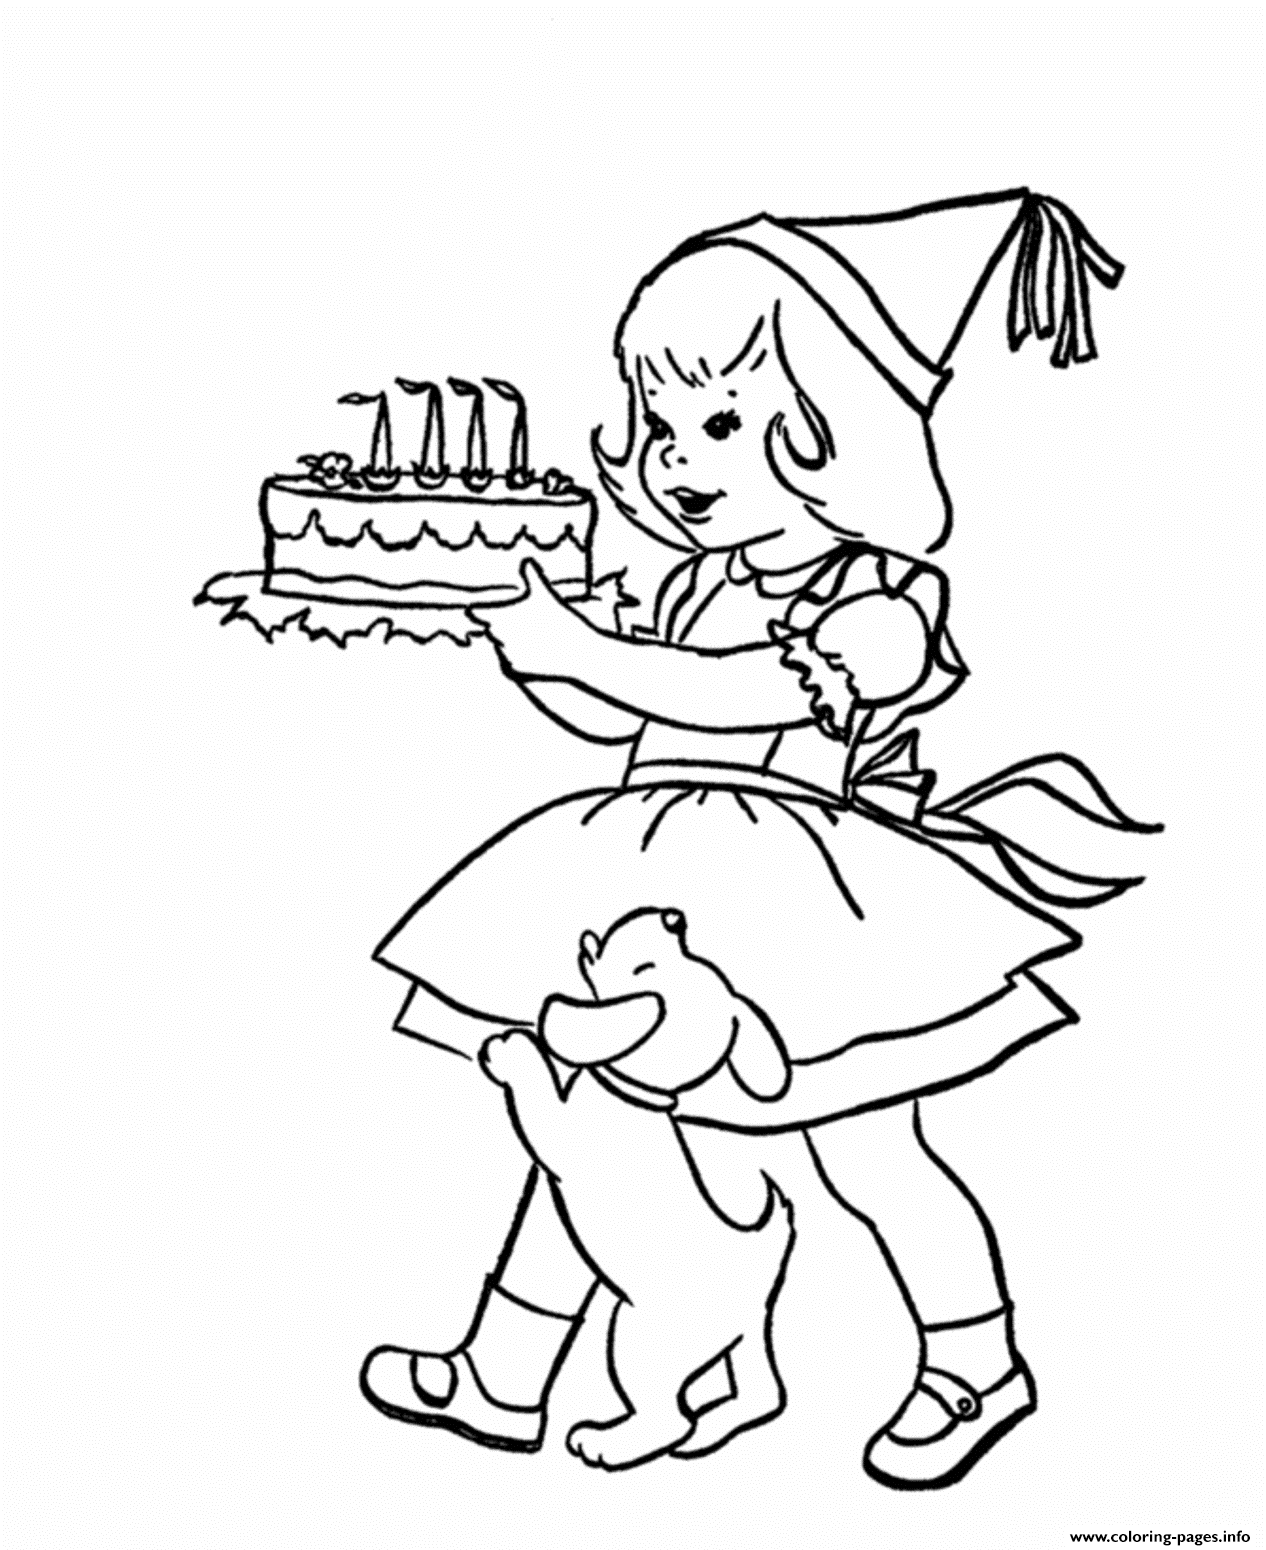 Girl And Birthday Cake F2b1 coloring